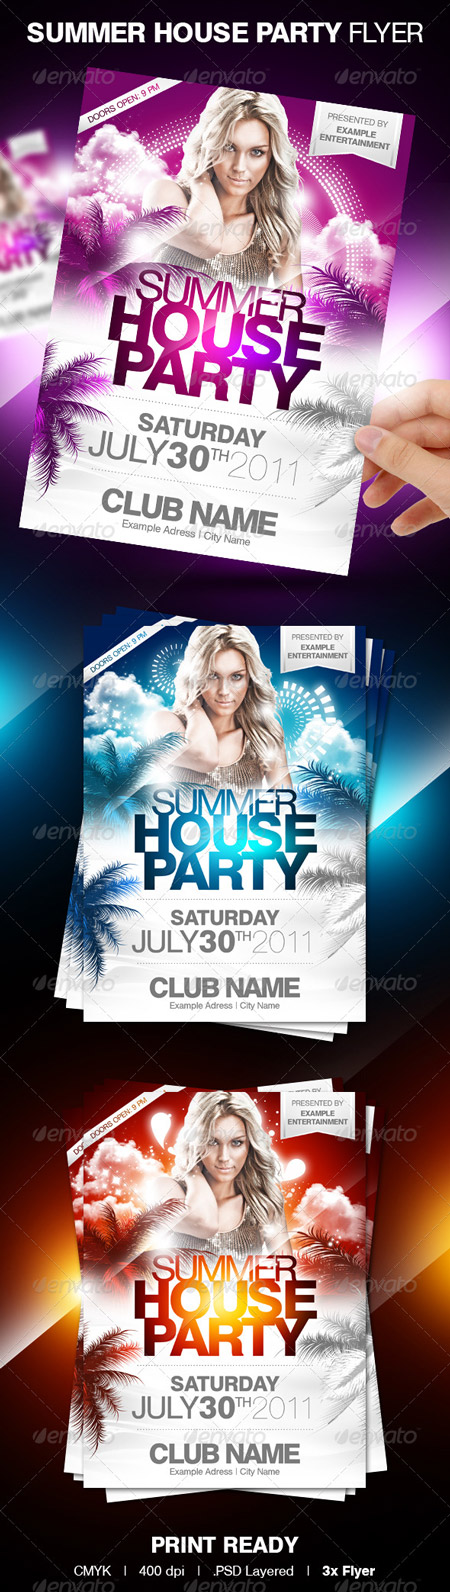 Graphicriver Summer House Party Flyer